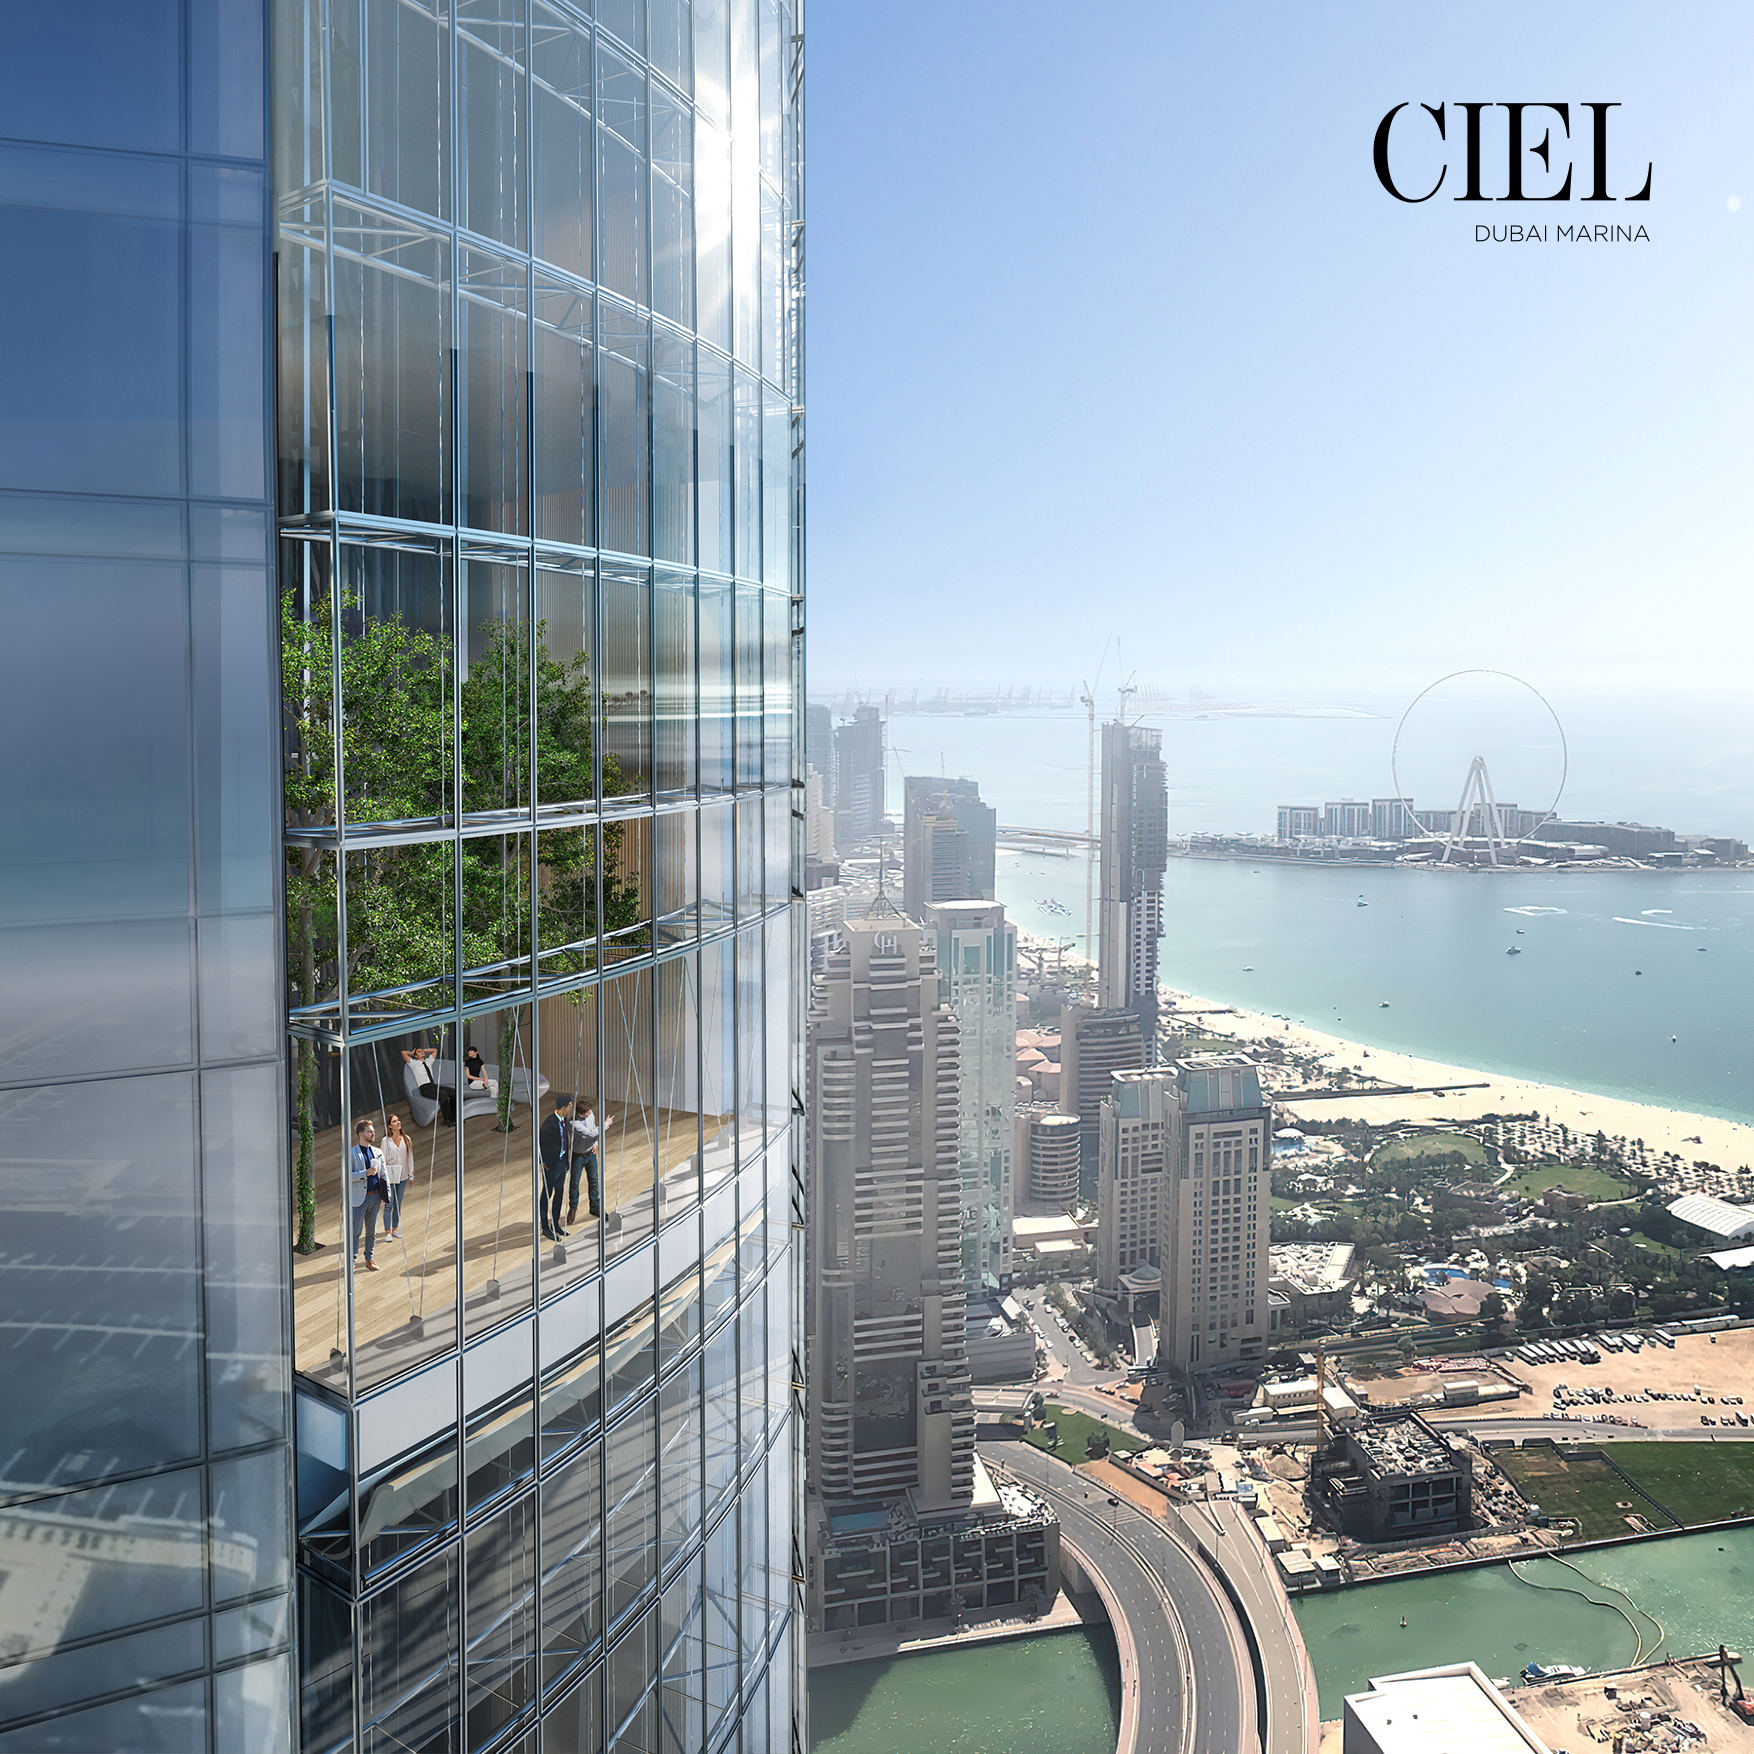 Ciel ‘a showcase of sustainable architectural design’ 